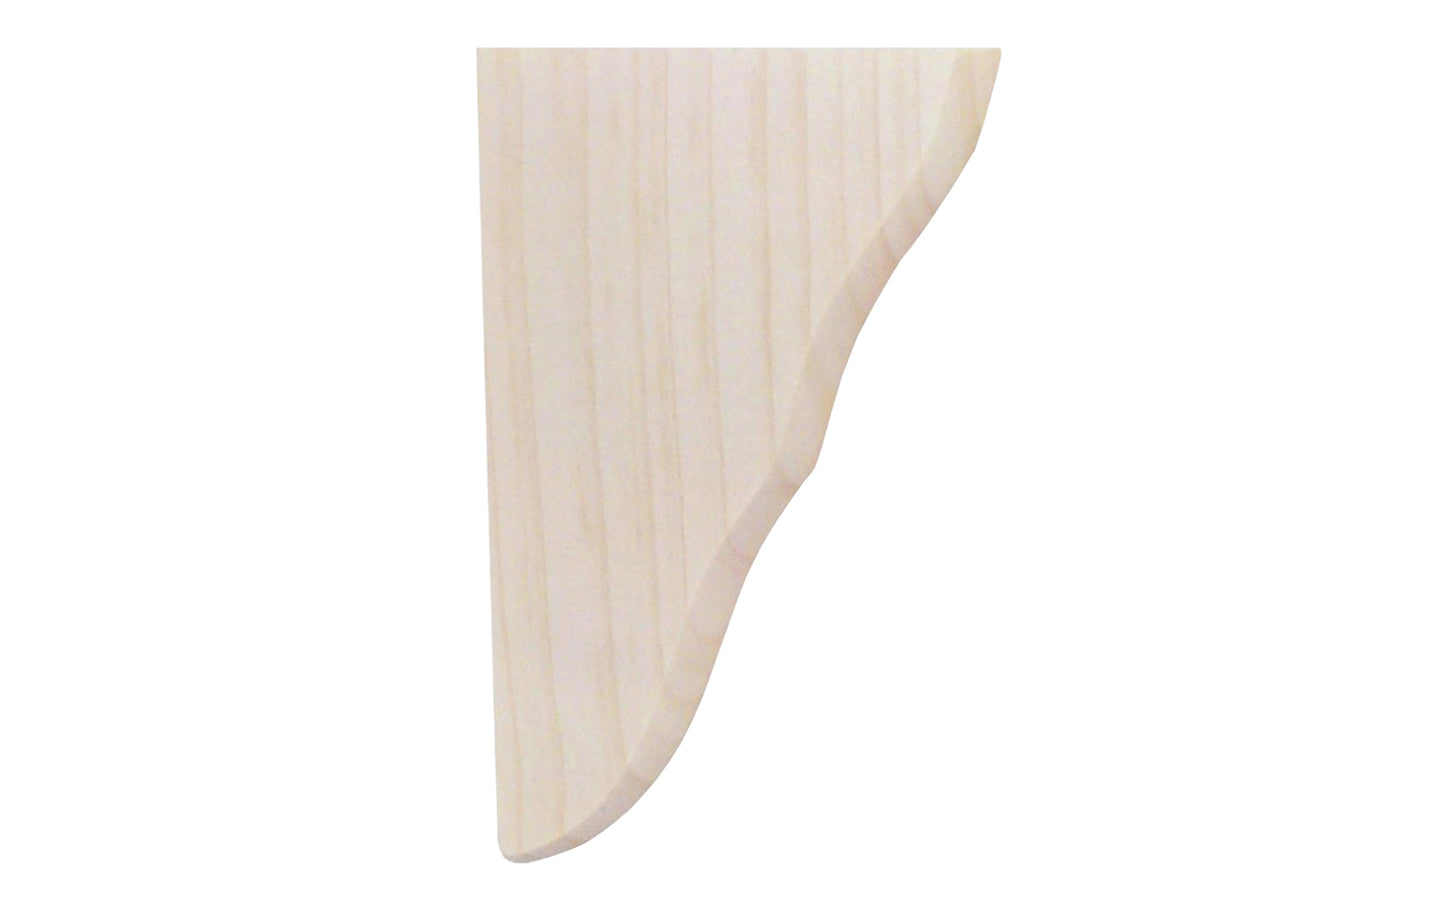 7" x 11" decorative unfinished pine wood corbel. Packed with keyhole hardware. Can be stained or painted. Hardware included. 3/4" thick. For use of shelves up to 10" wide.  Made by Waddell Mfg.